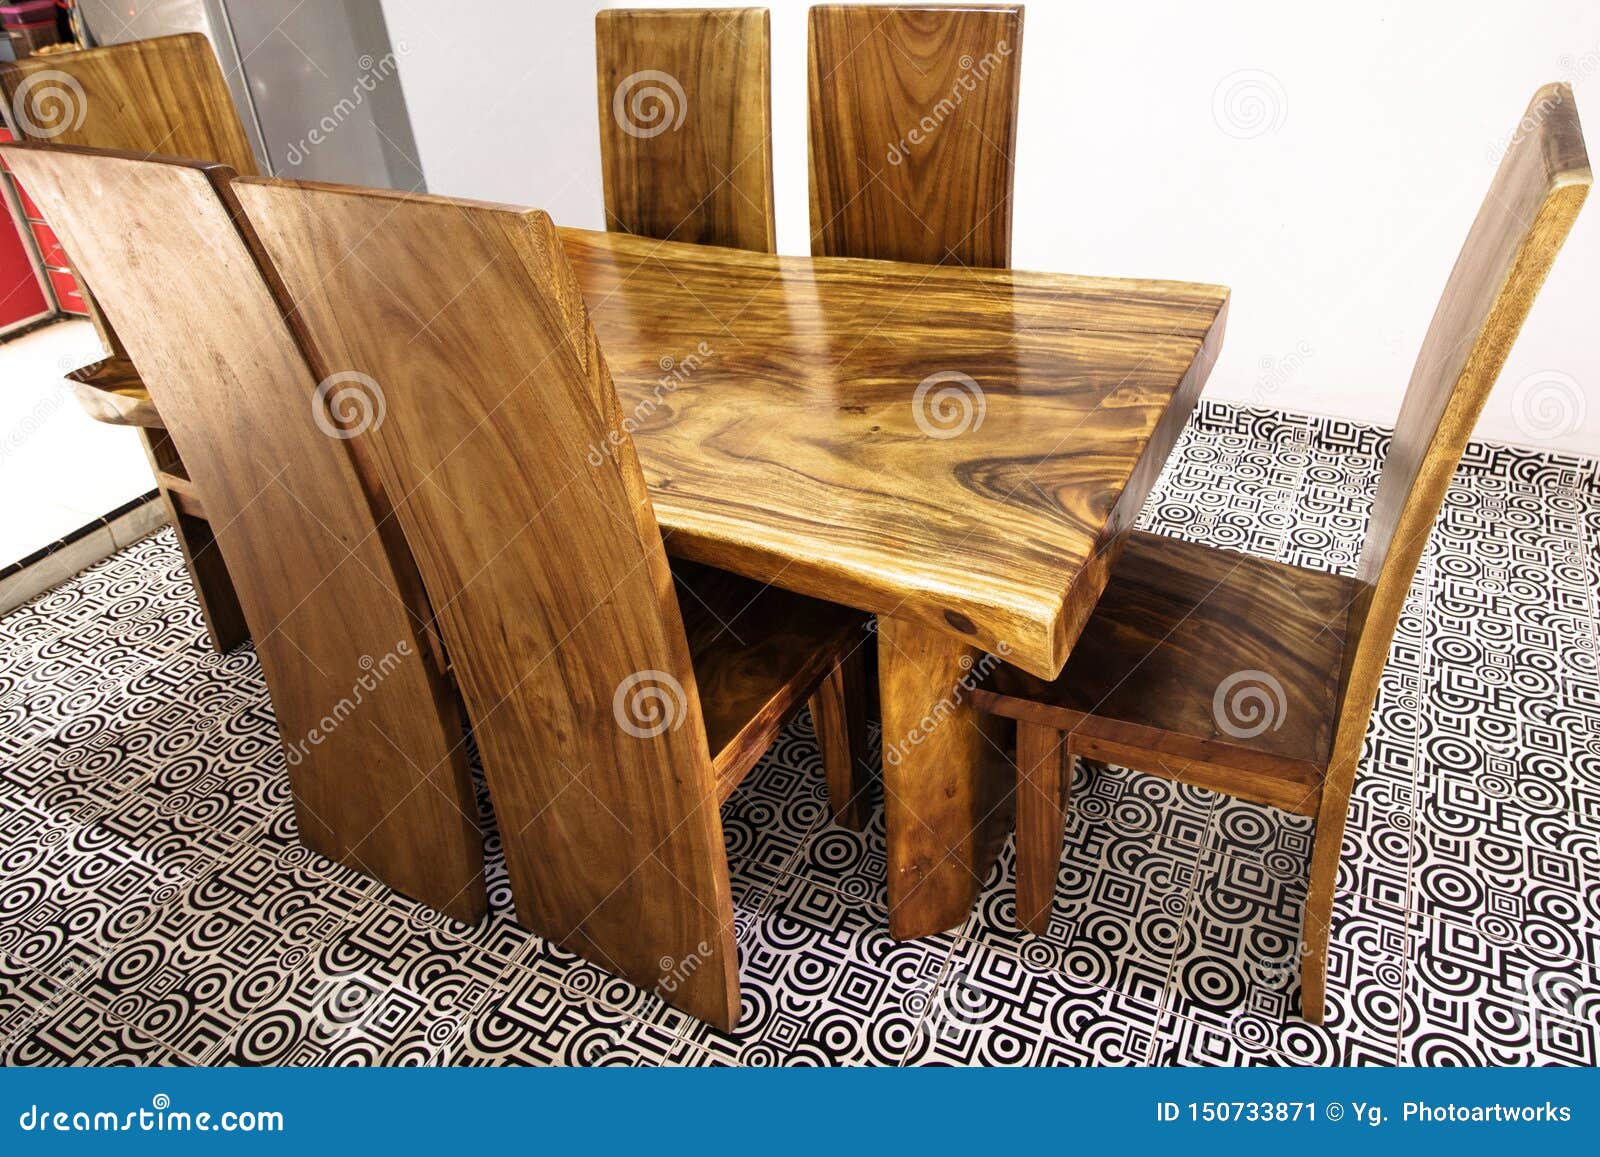 Traditional Suar Wood Kayu Trembesi Is Made From Original Indonesian Natural Wood Stock Image Image Of Luxury